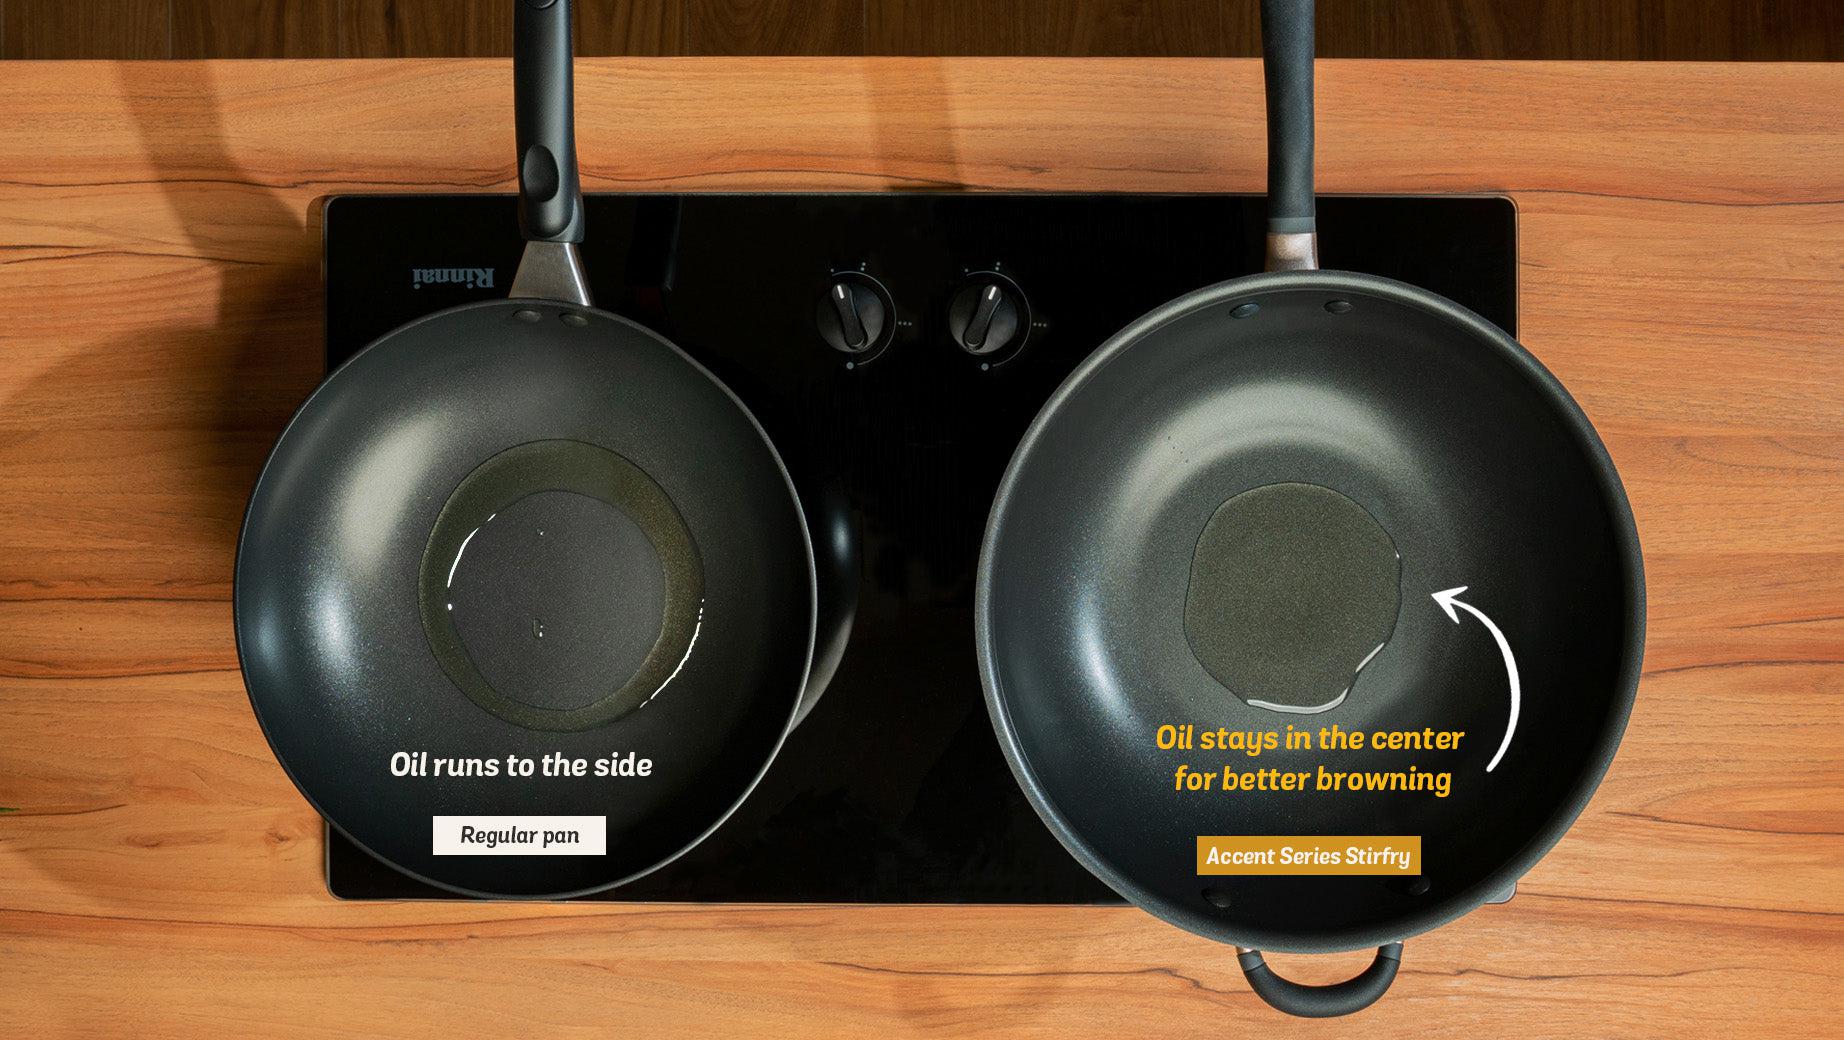 Comparing the Meyer nonstick stirfry pan with a regular pan to illustrate the oil stays in the center in the Meyer pan for better bronwing while oil tends to spread to the outer edges in the regular pan